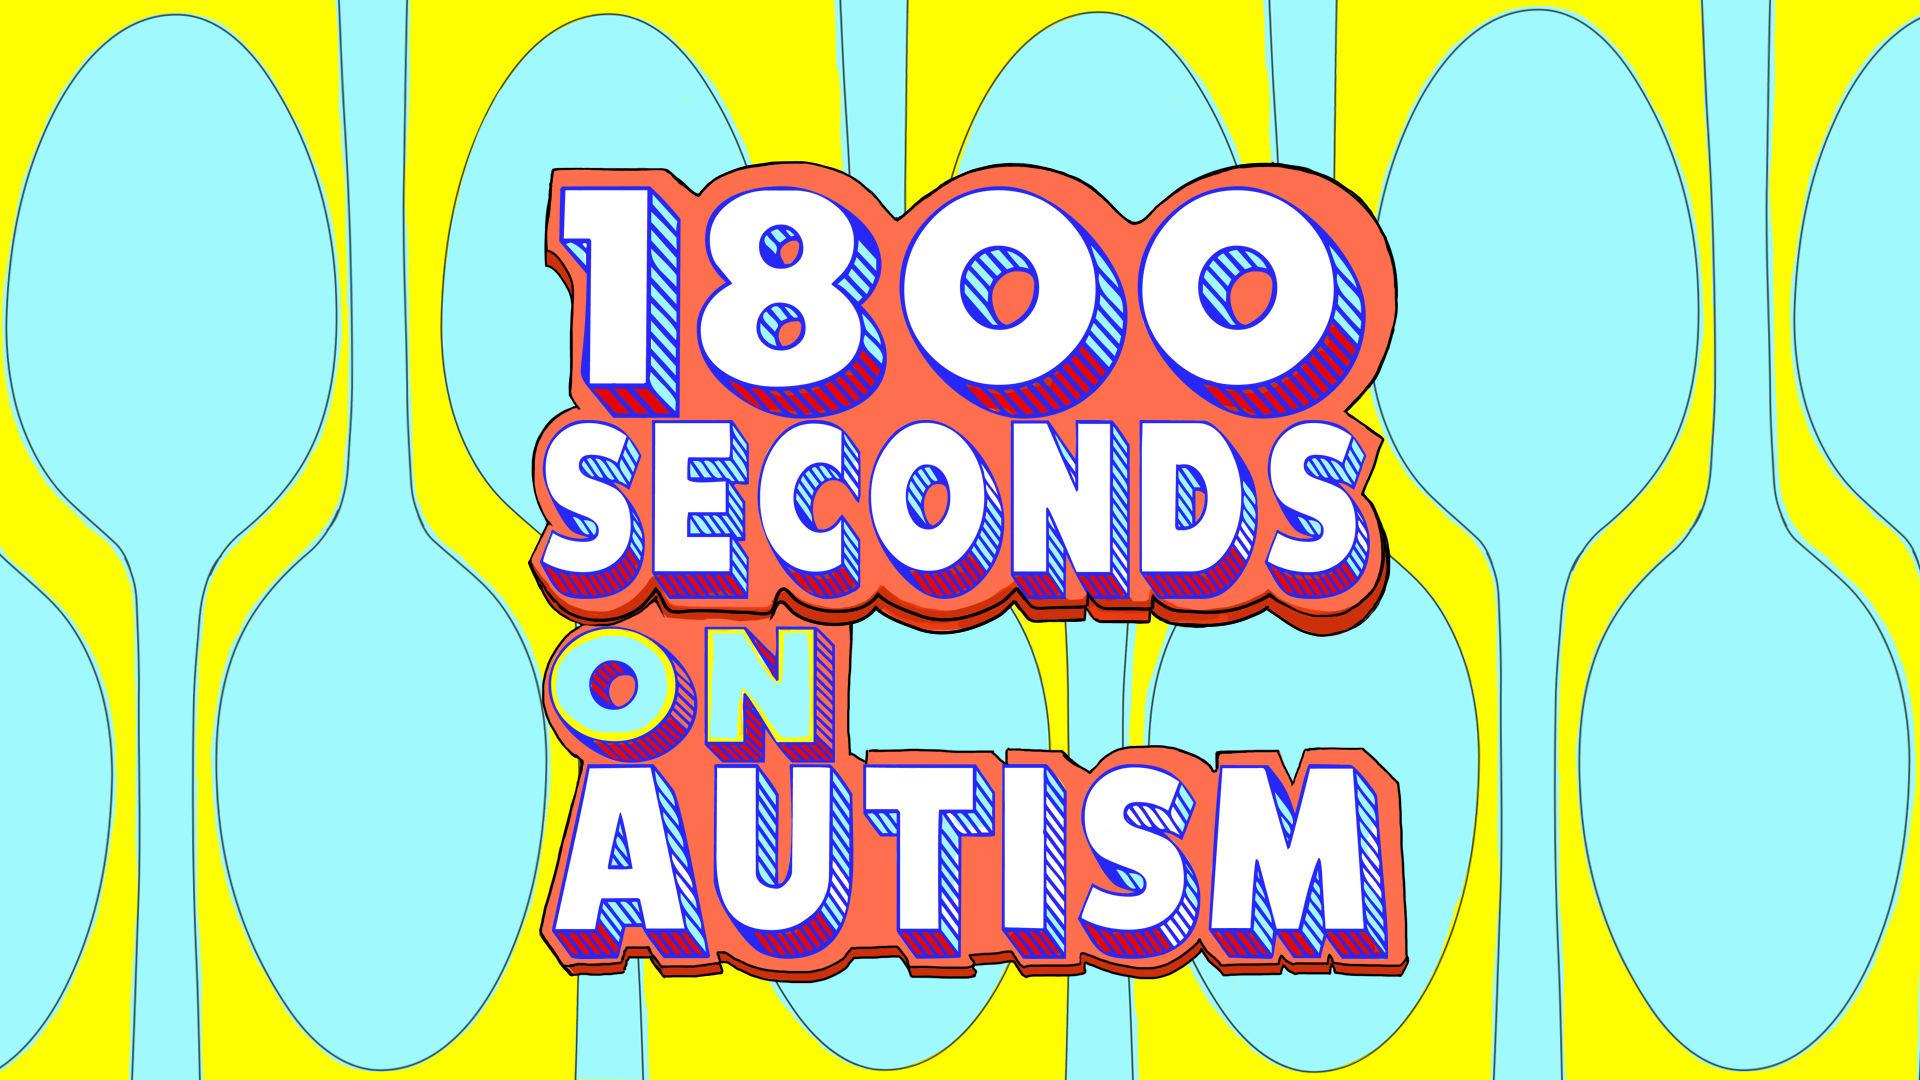 he 1800 seconds on autism podcast logo. Featuring the name of the podcast in white text on a pink middle ground, with a background of yellow with interlocking spoons in blue